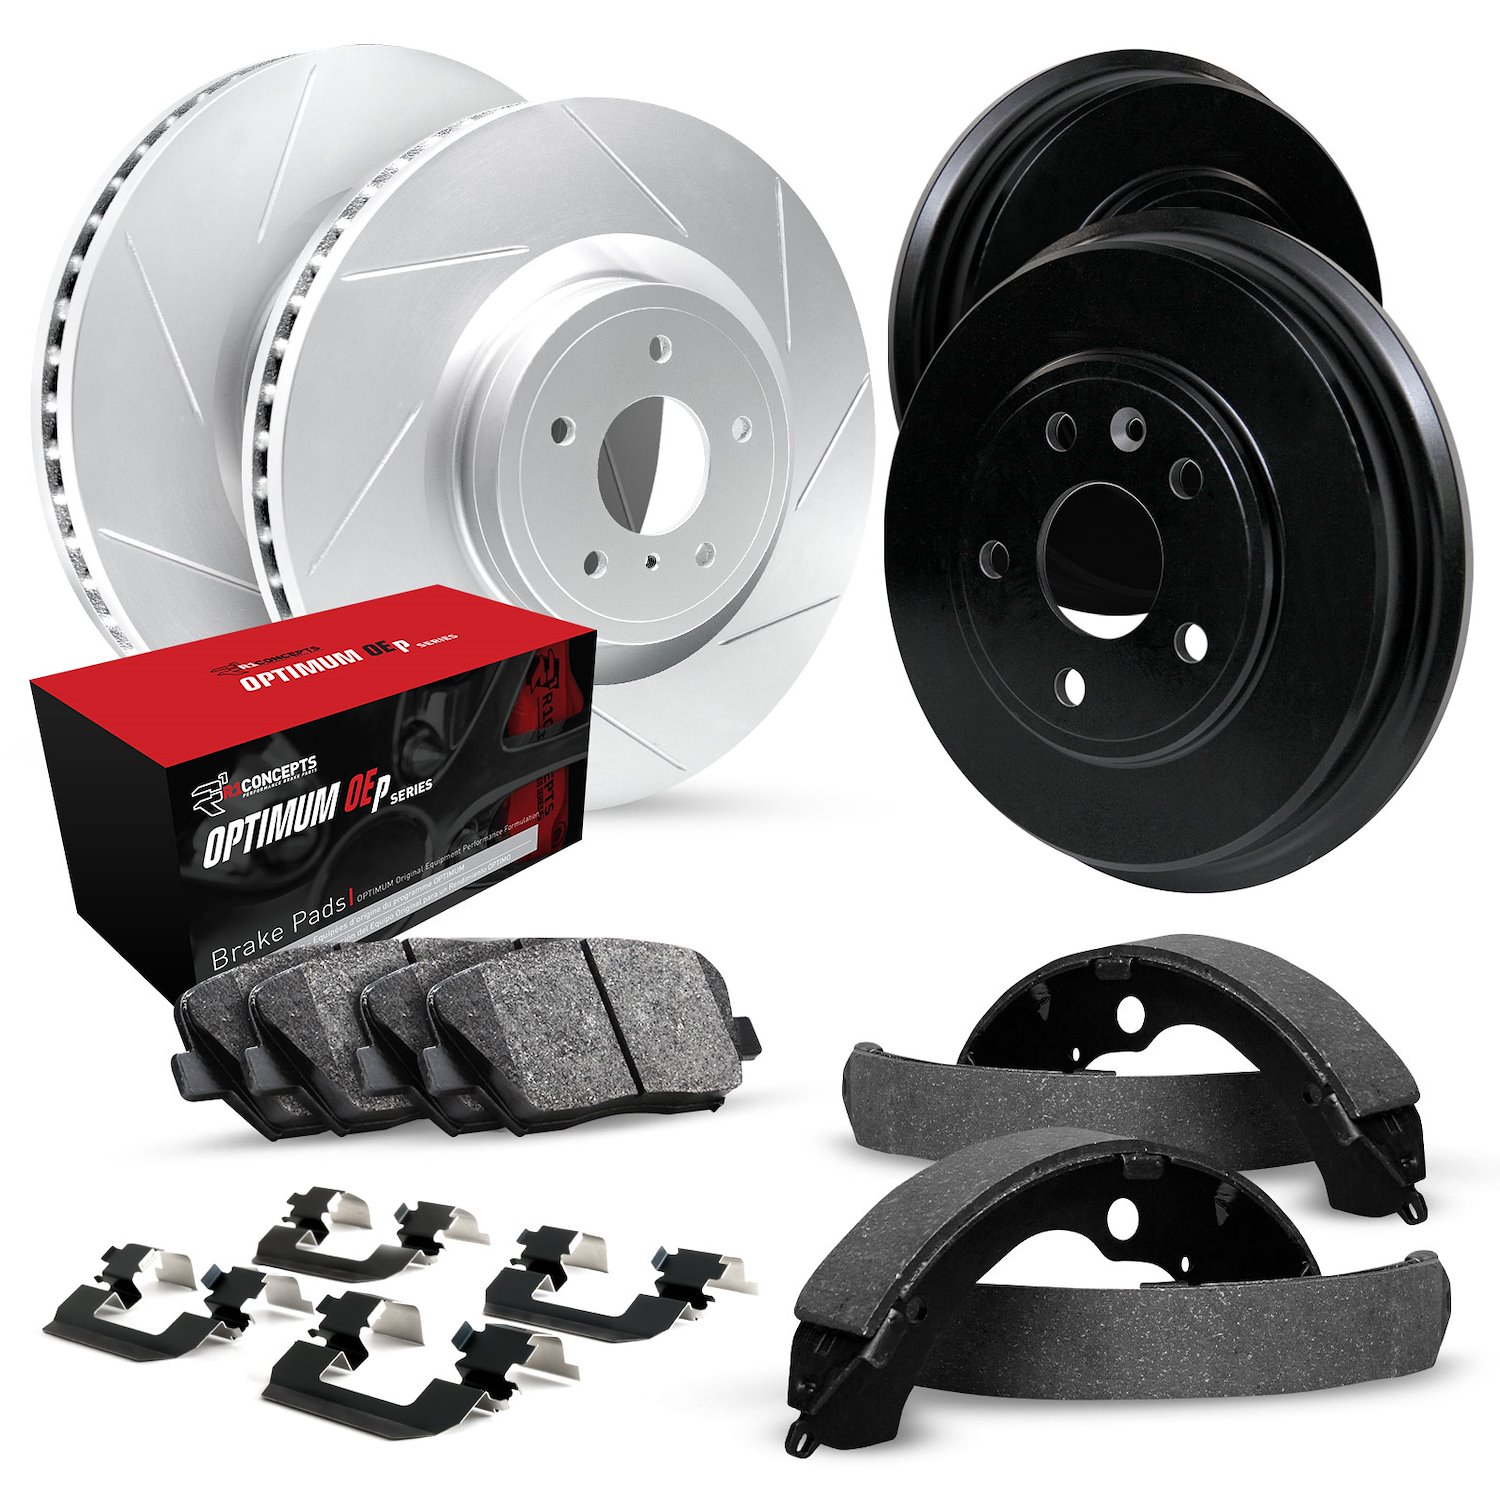 GEO-Carbon Slotted Brake Rotor & Drum Set w/Optimum OE Pads, Shoes, & Hardware, 1973-1973 GM, Position: Front & Rear